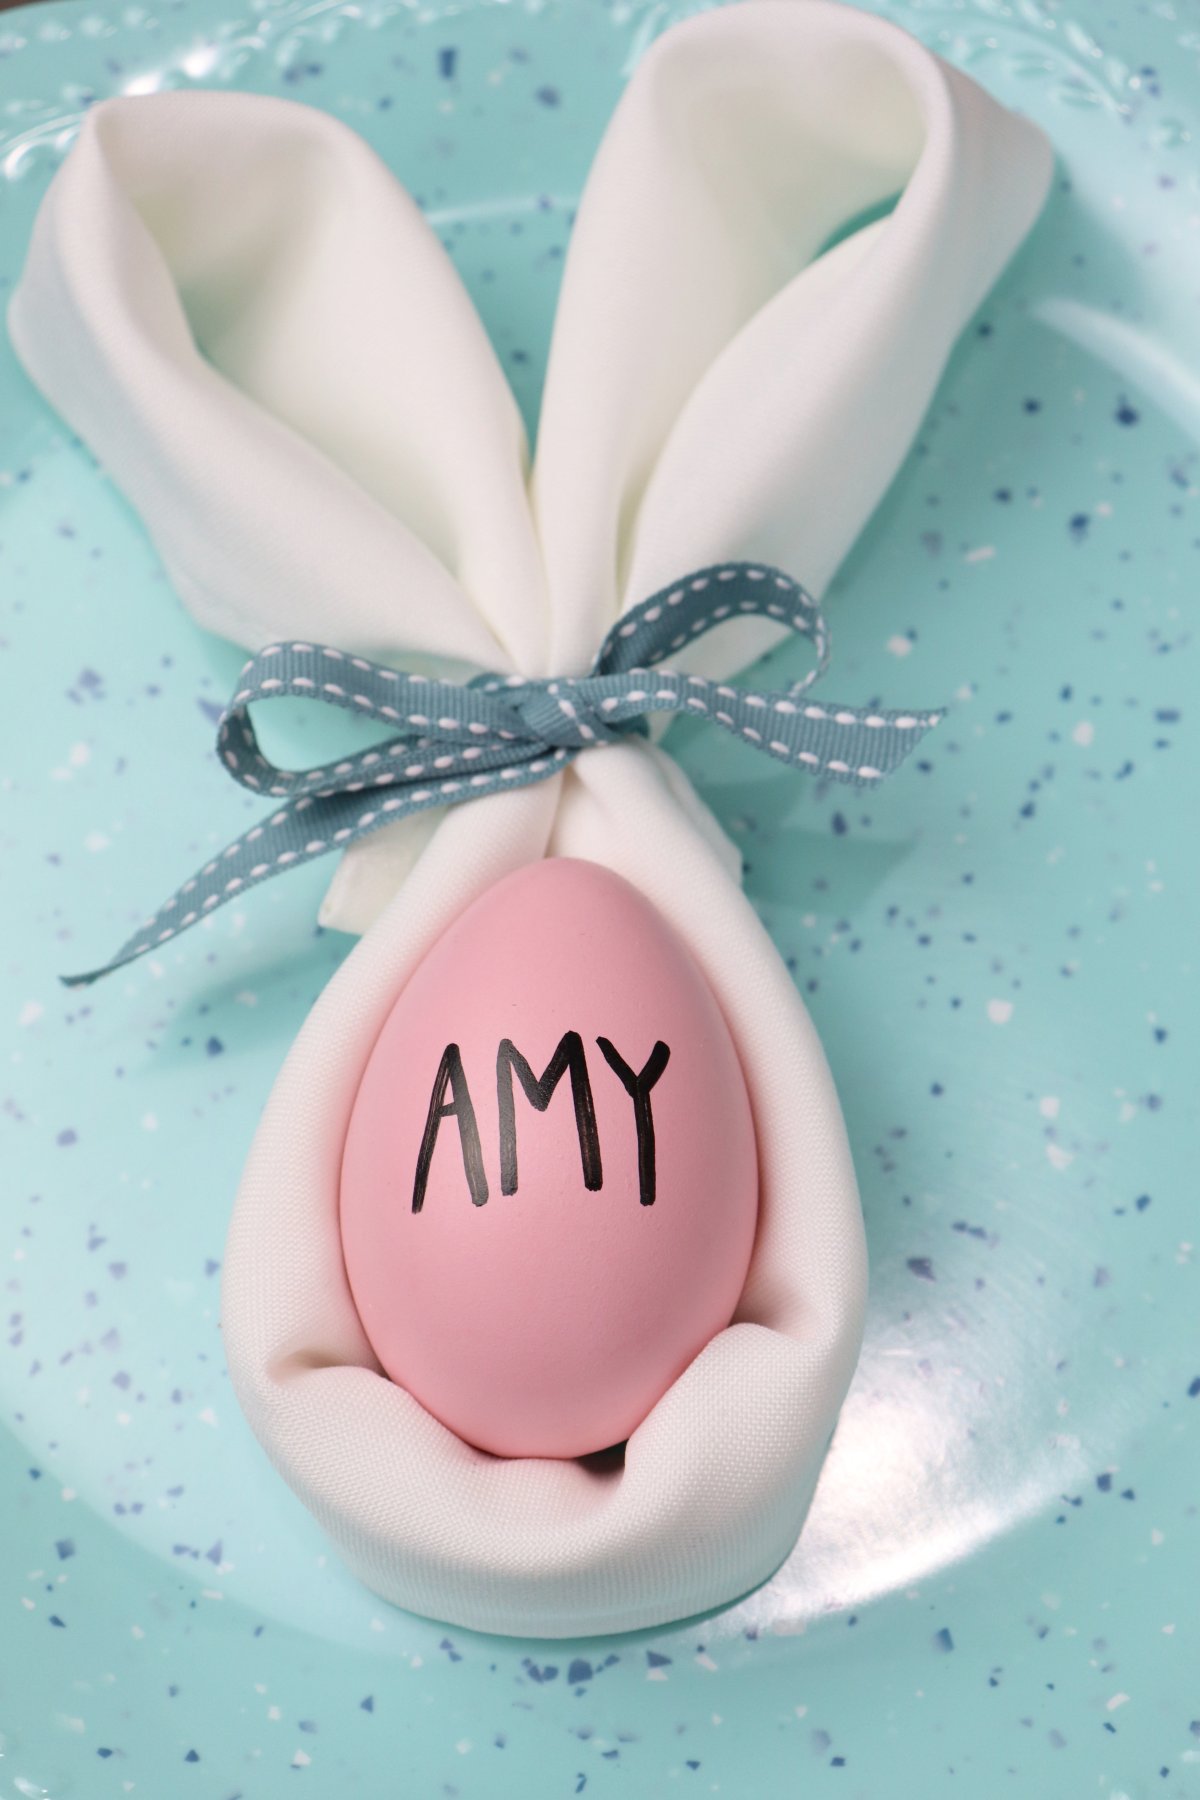 Image shows a white cloth napkin folded like a bunny head and ears with a blue bow. Inside the napkin is a pink egg with the name "Amy" written on it in black print. It sits on a teal plate.